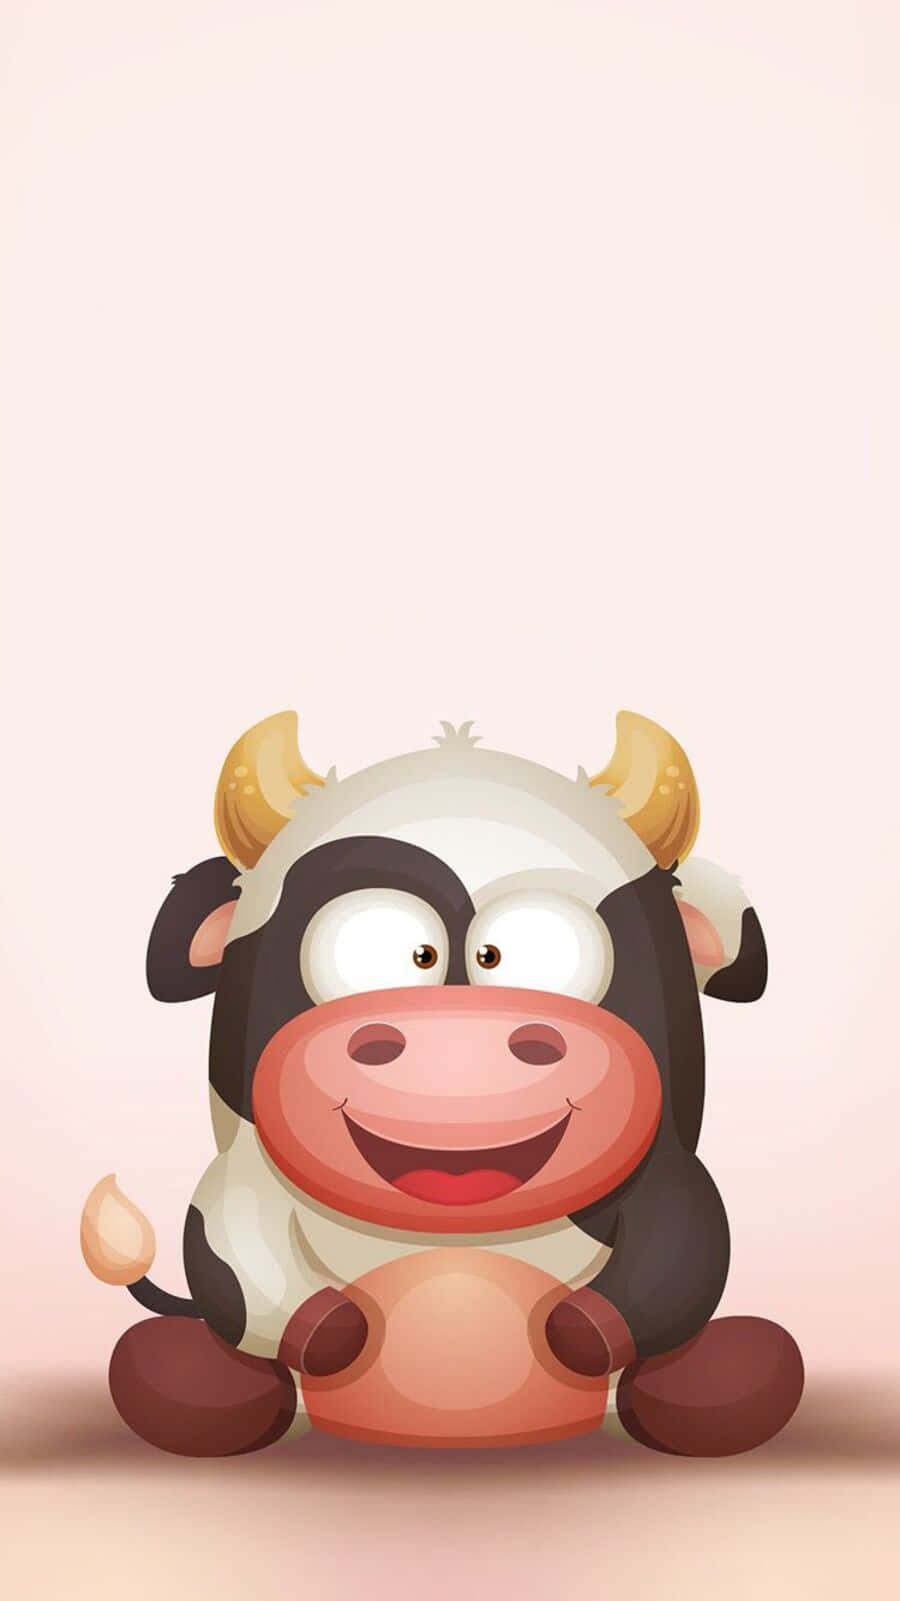 Adorable Kawaii Cute Cow with Pink Background Wallpaper